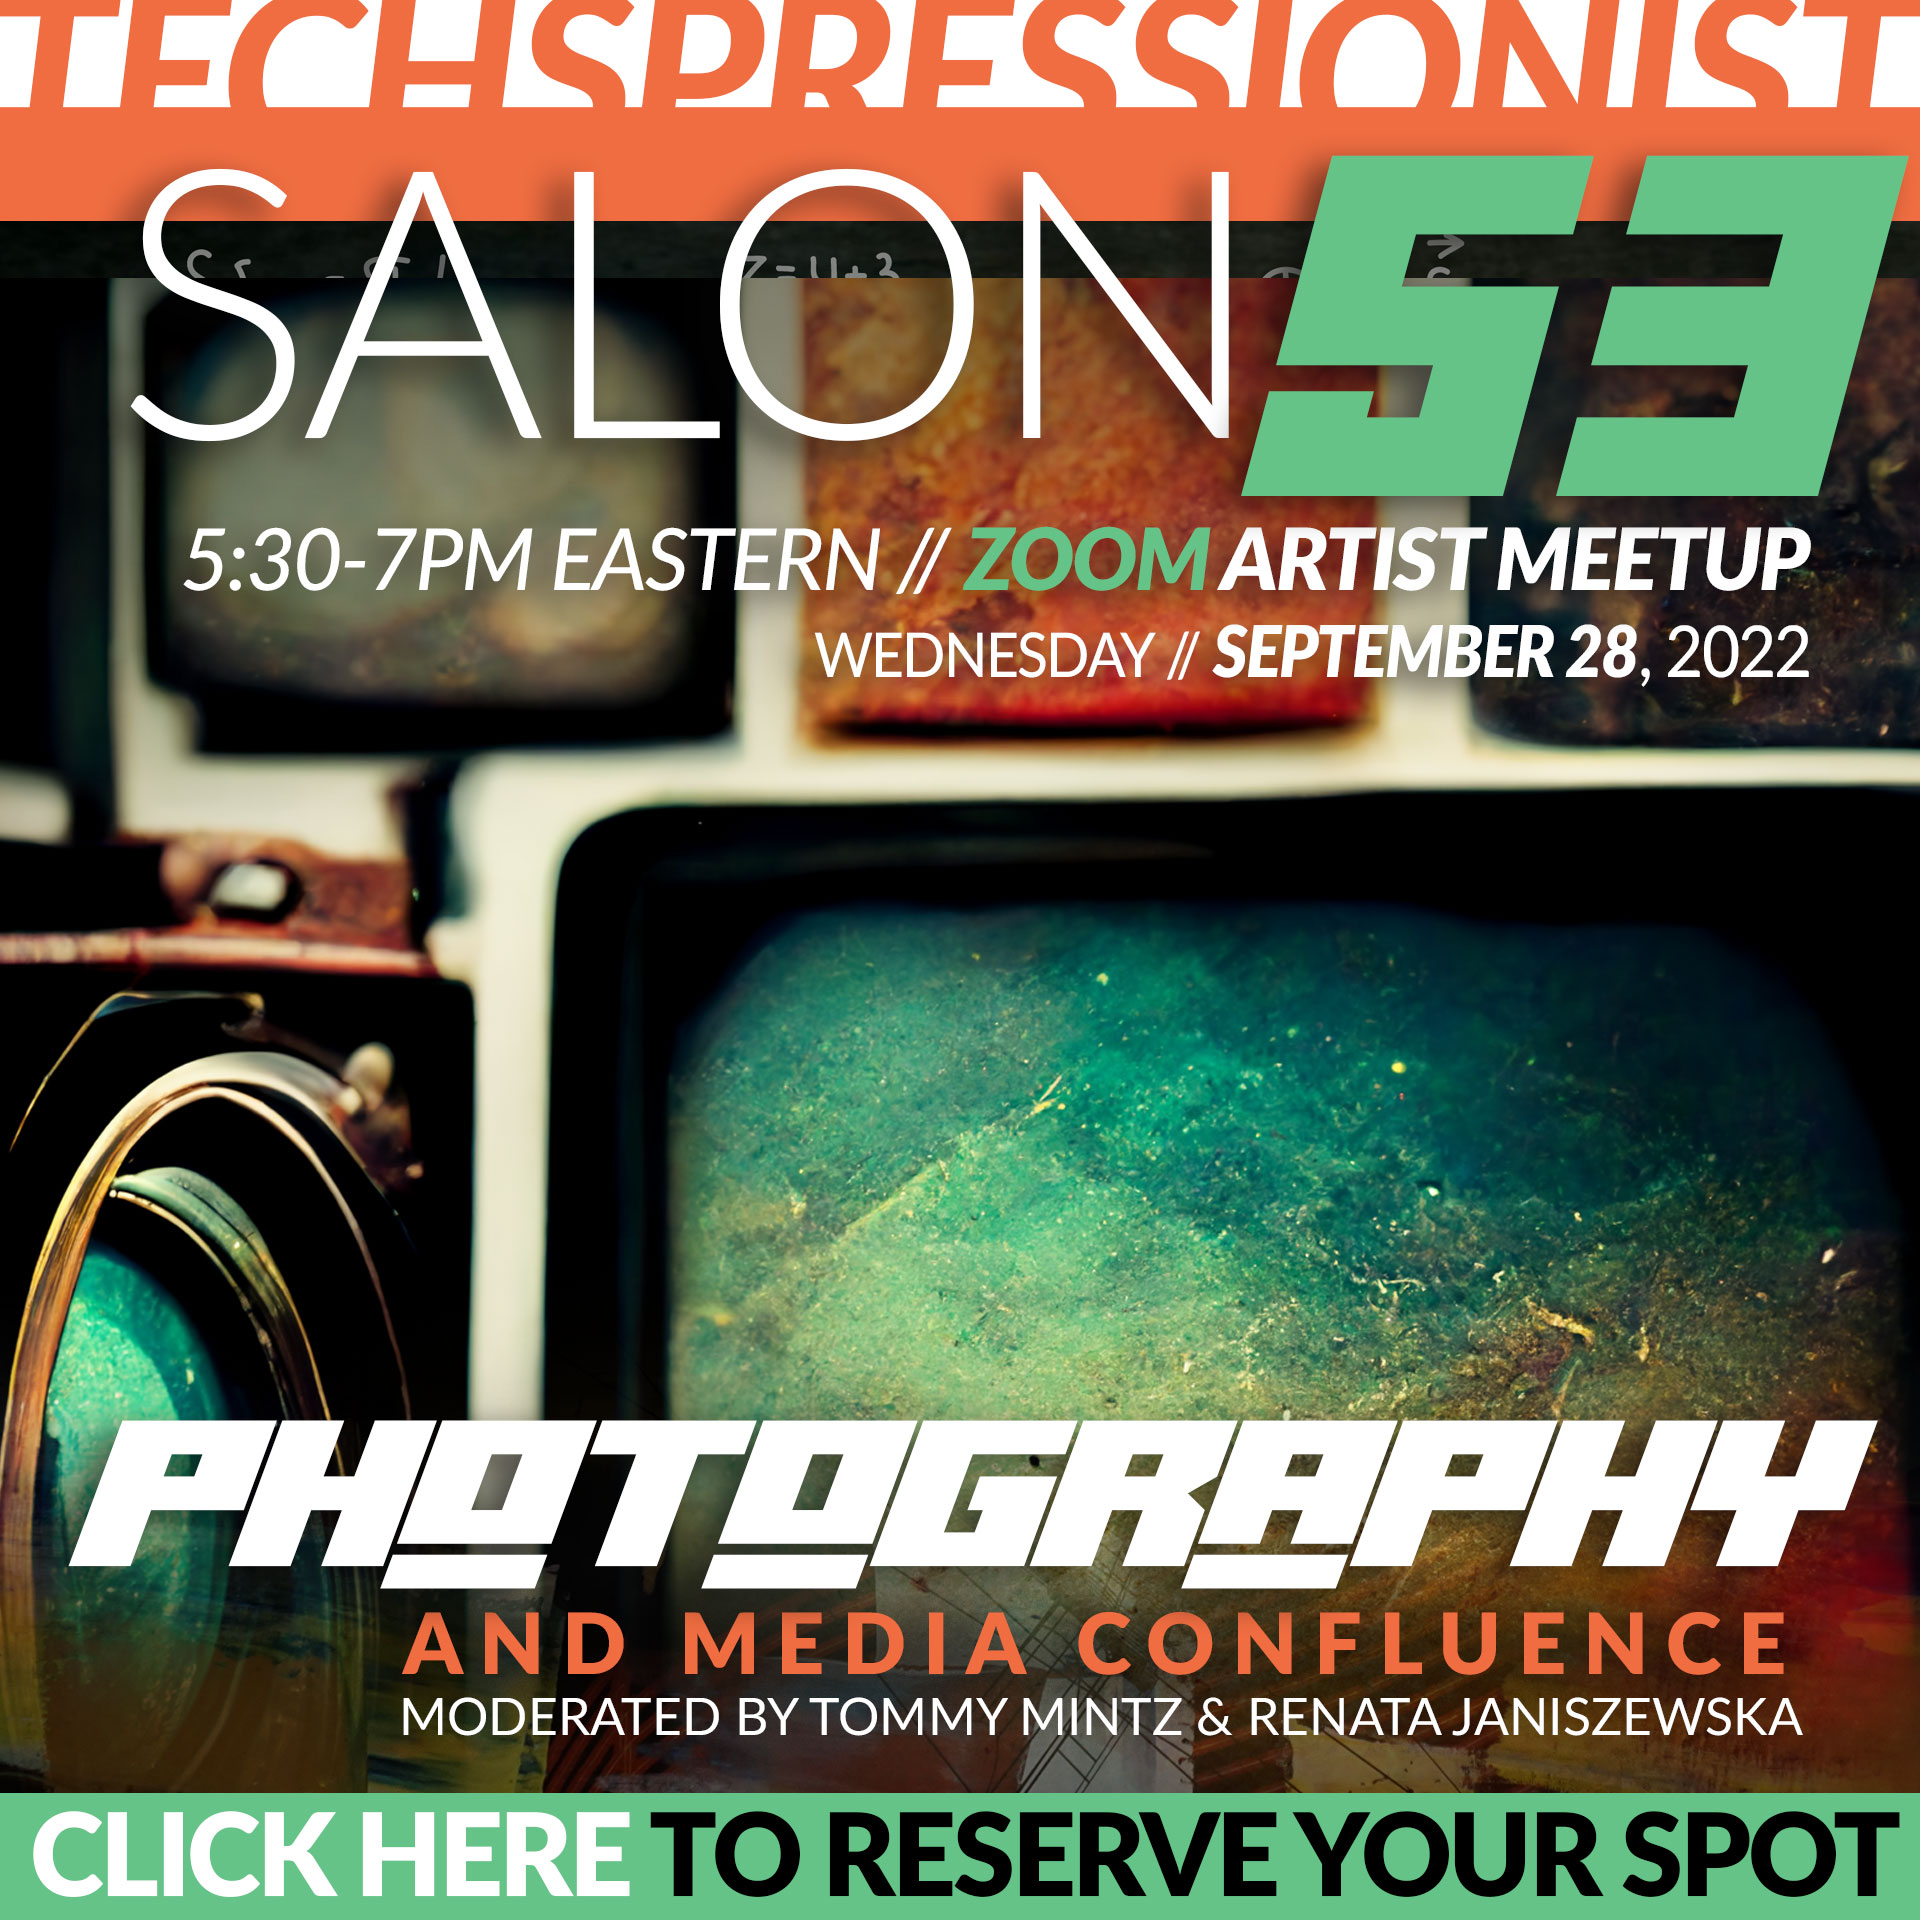 Techspressionist Salon 52 - Photography and Media Confluence